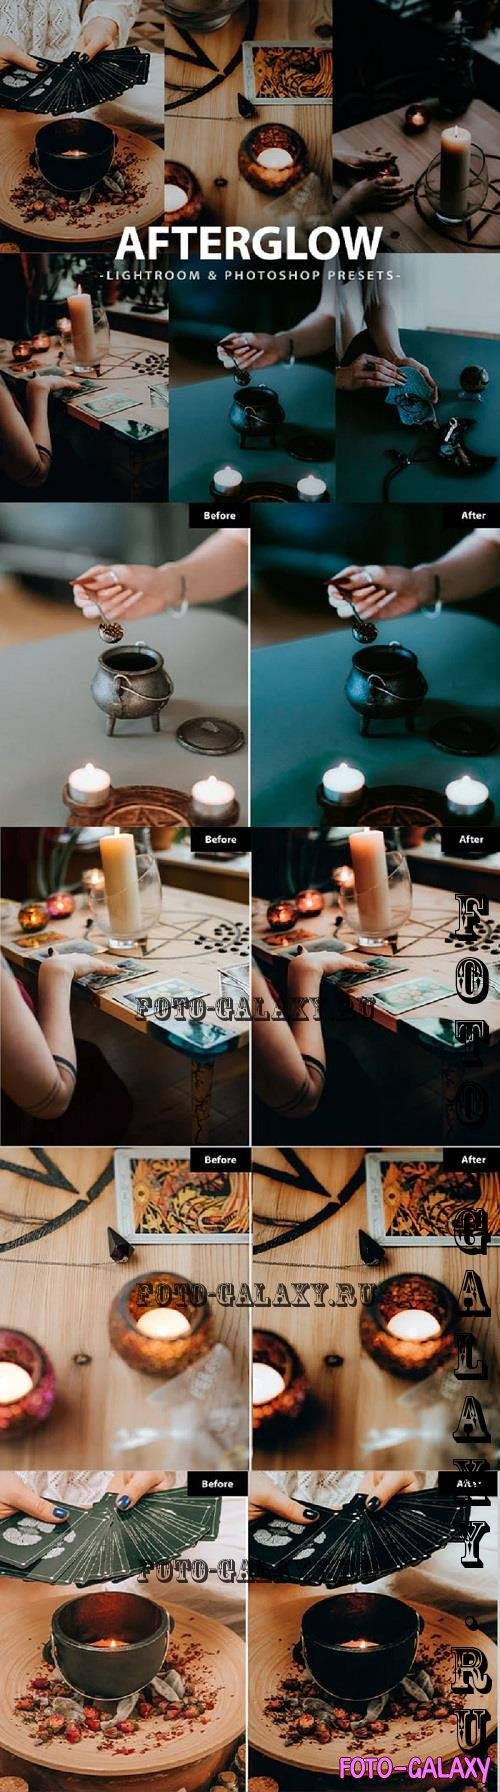 6 Afterglow Lightroom and Photoshop Presets - 46512519